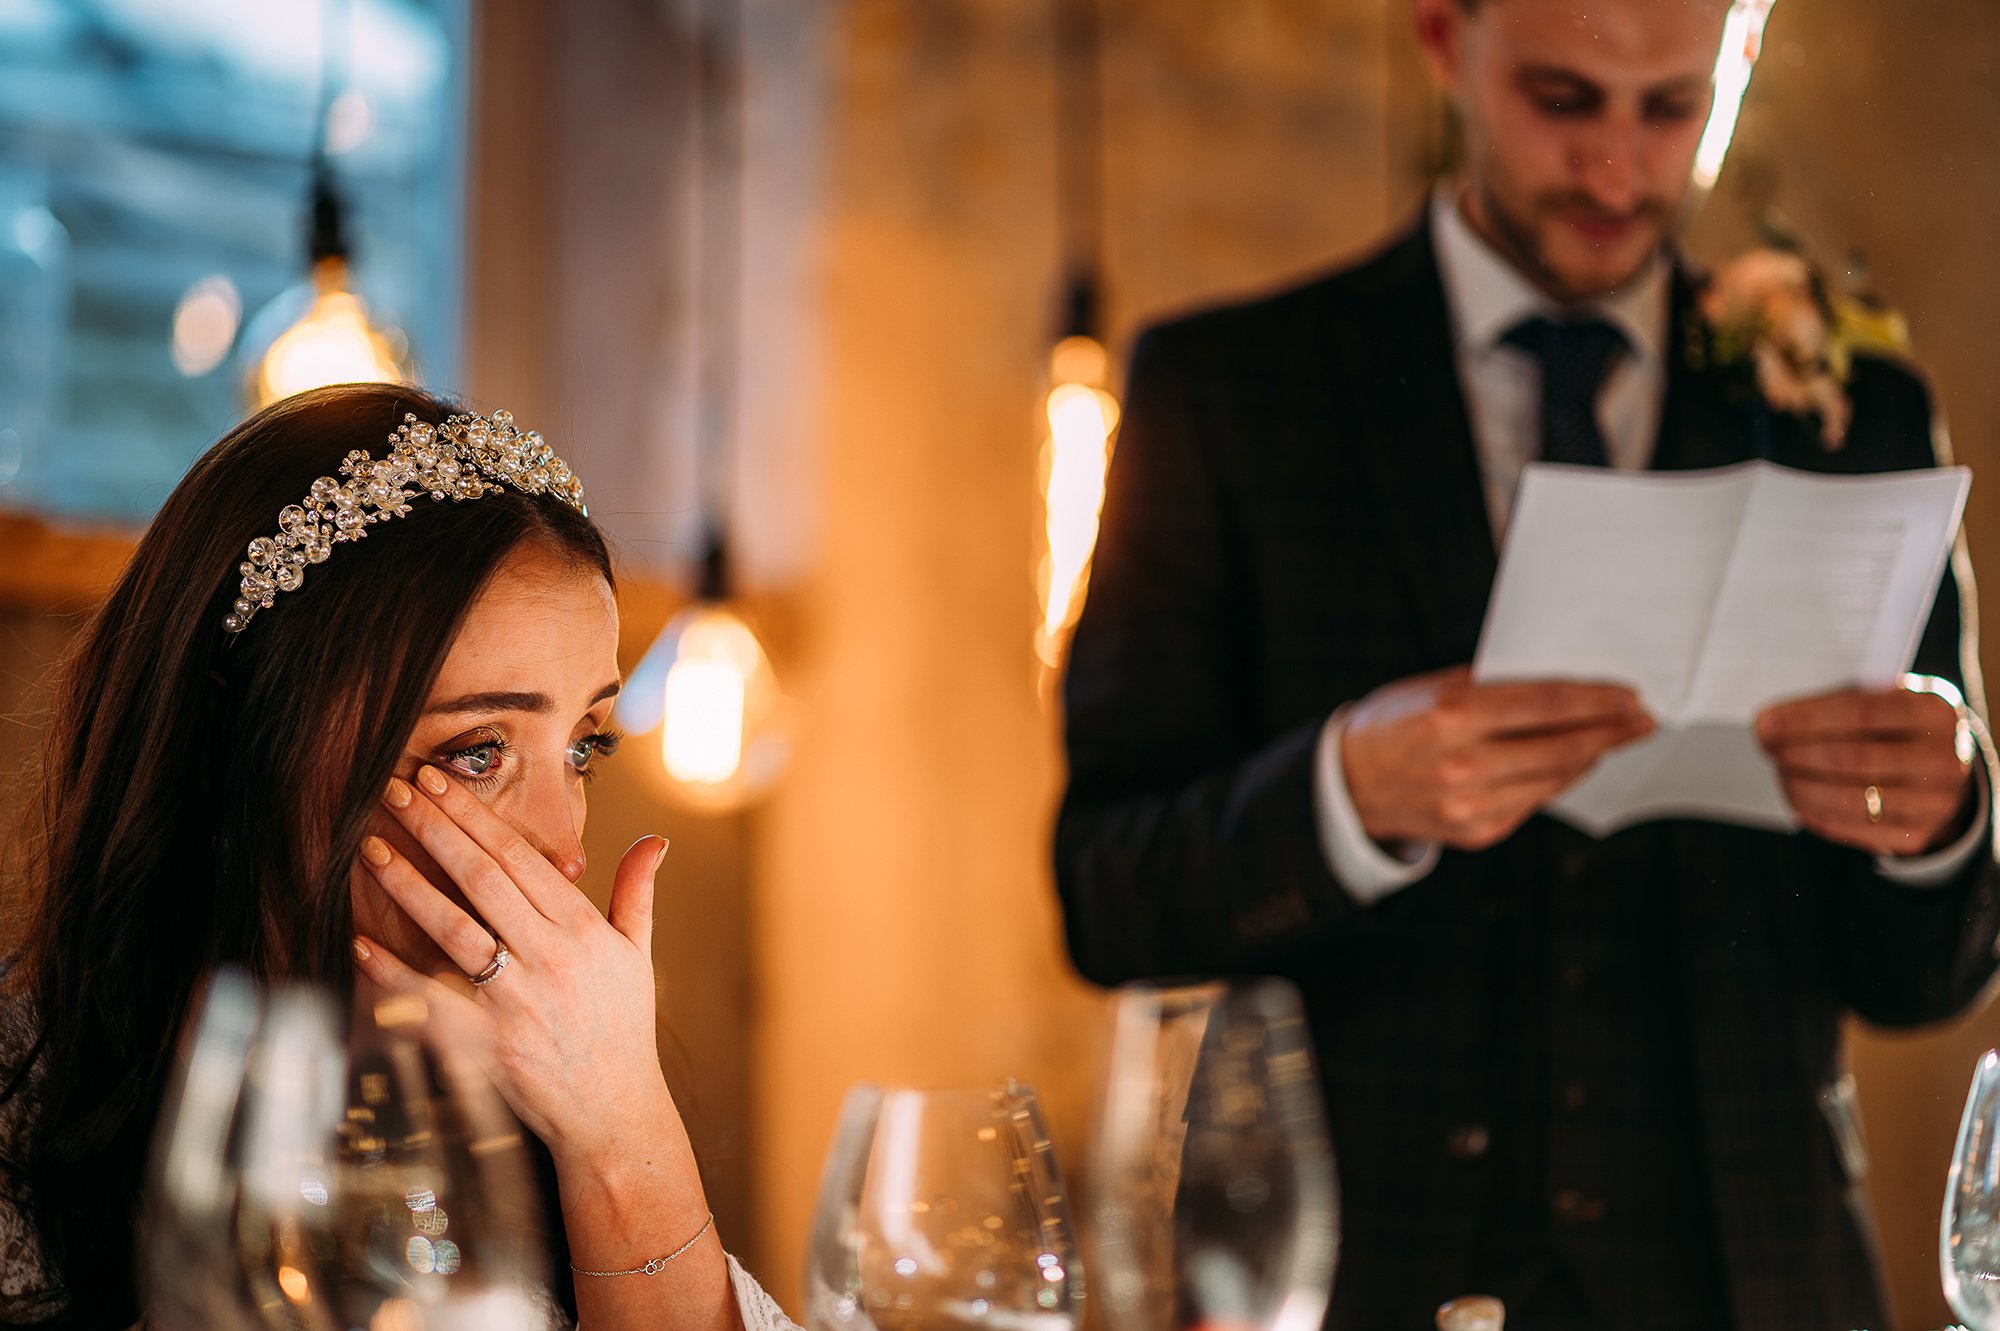  Brides eyes filled with tears. She wipes one during her husbands speech. 